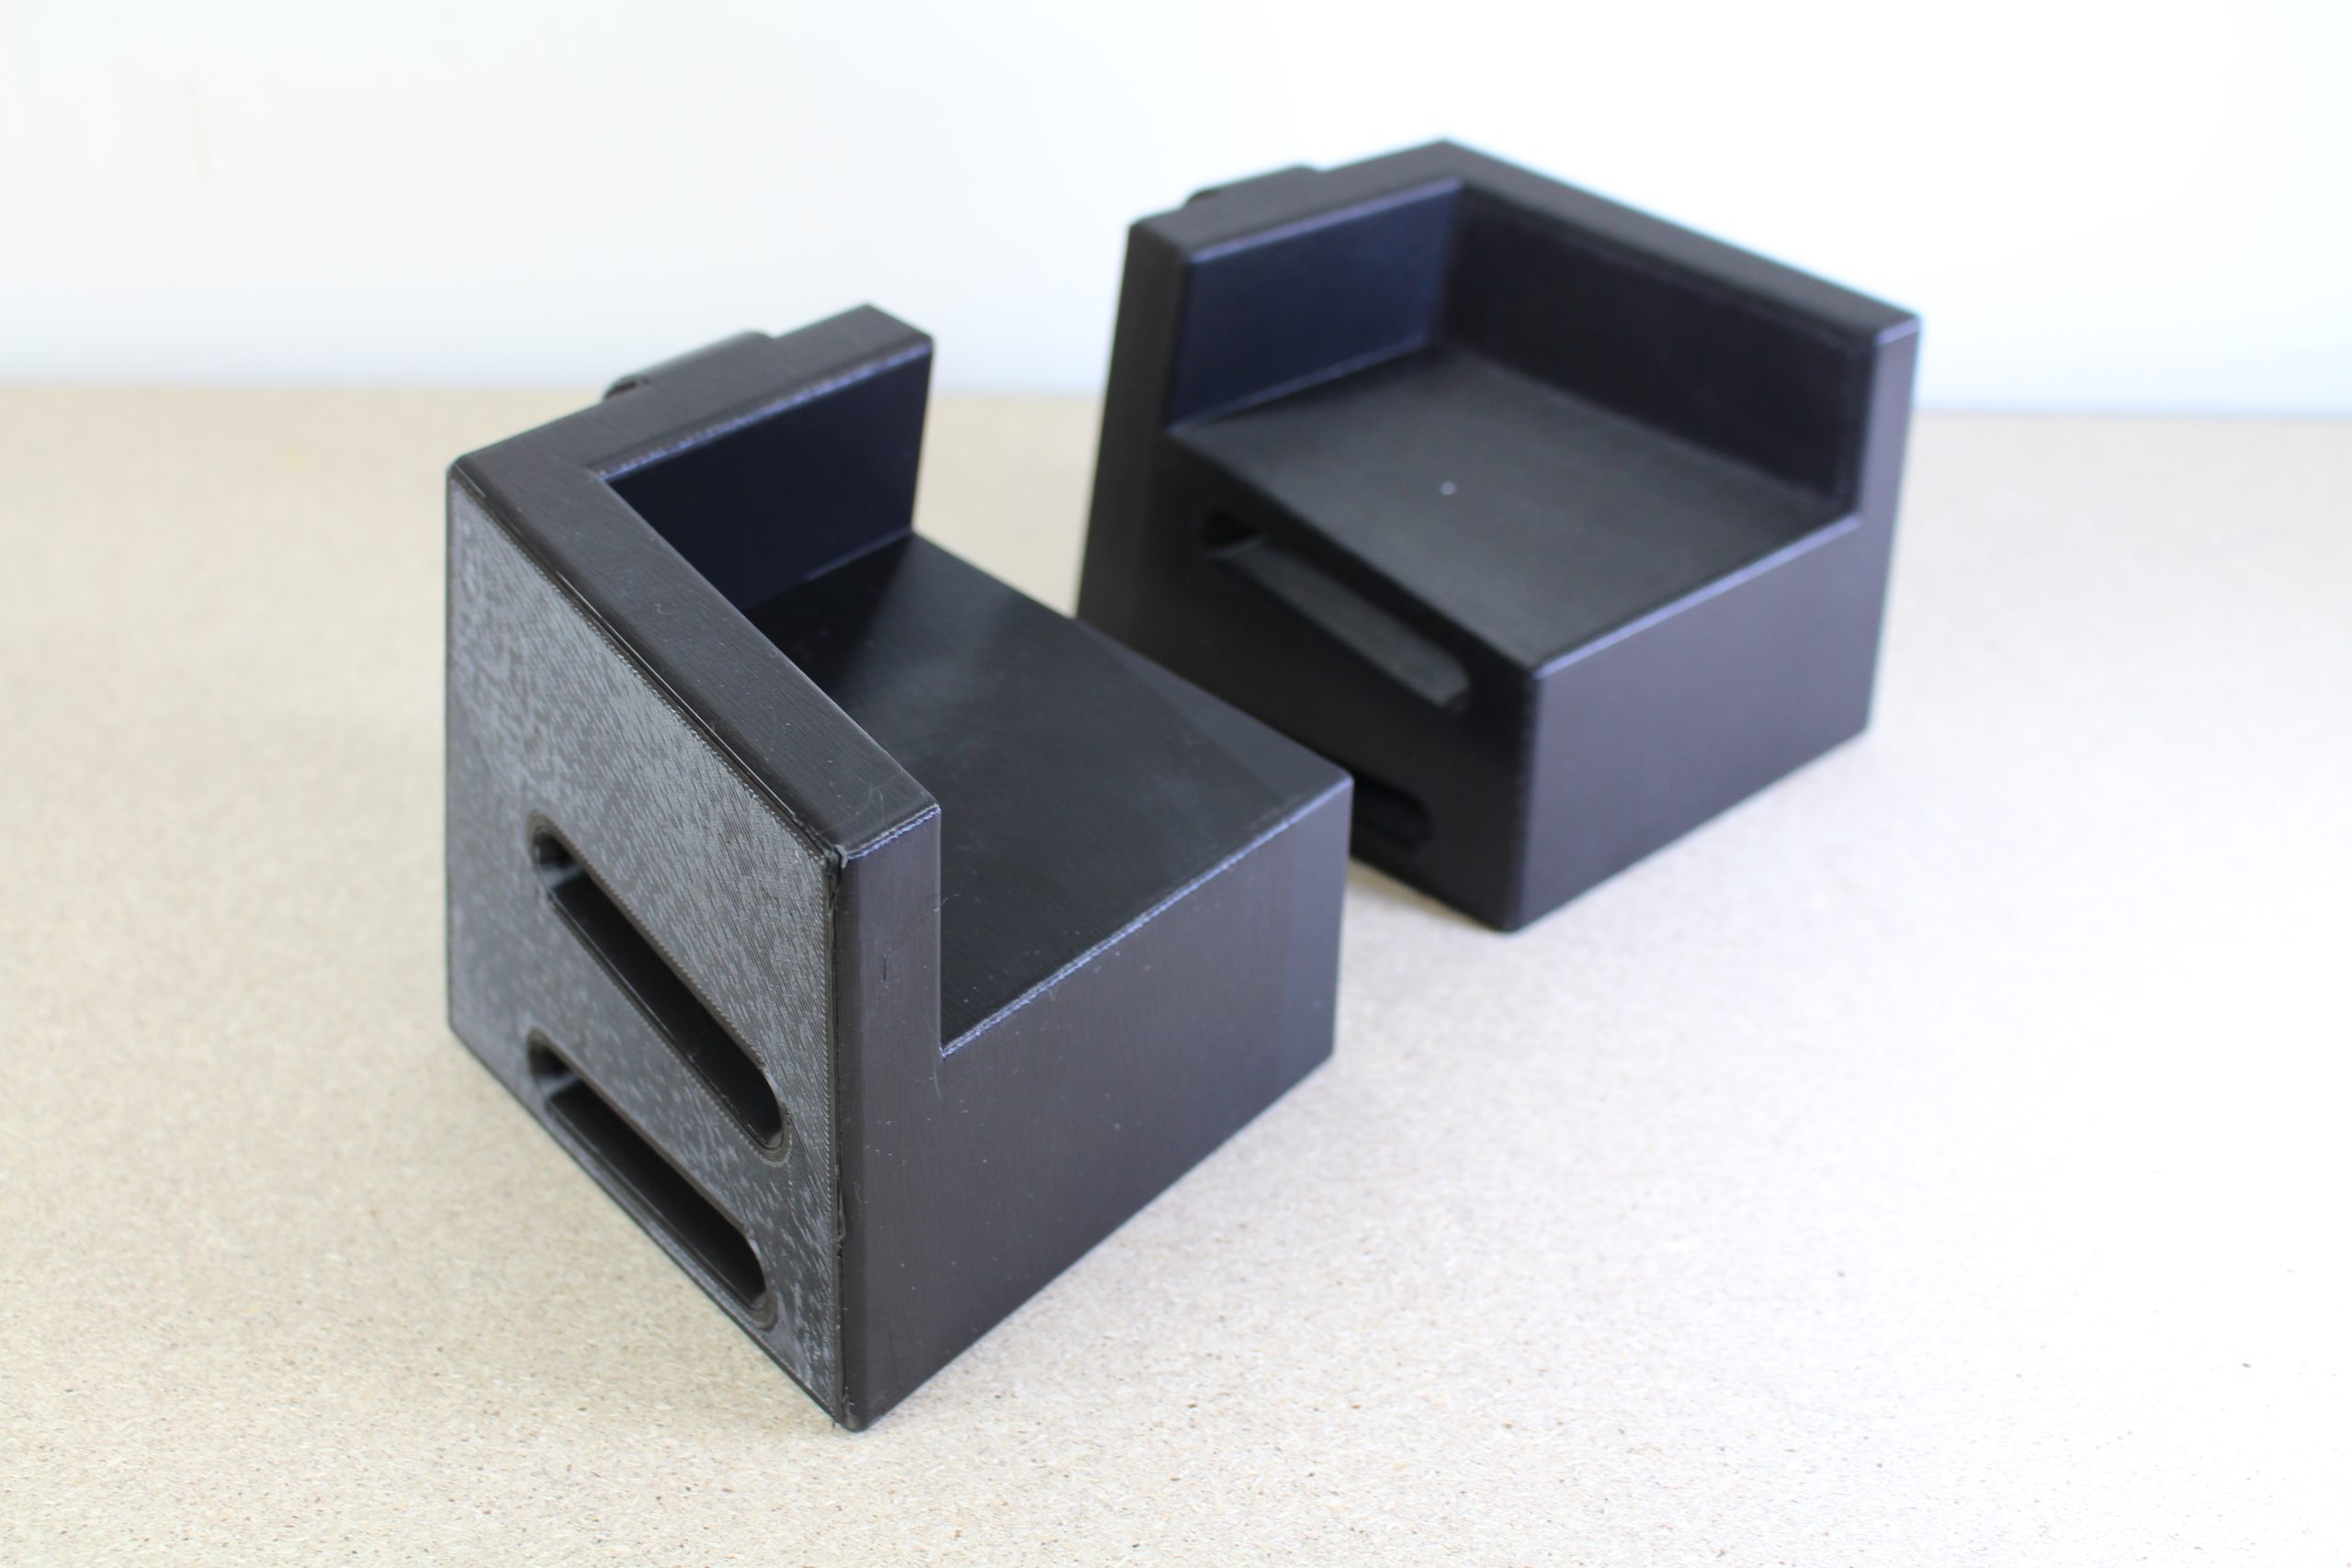 Funktion-One Res 2 ground stacks 3D printed in PC. Photos by 3D Printing Industry.